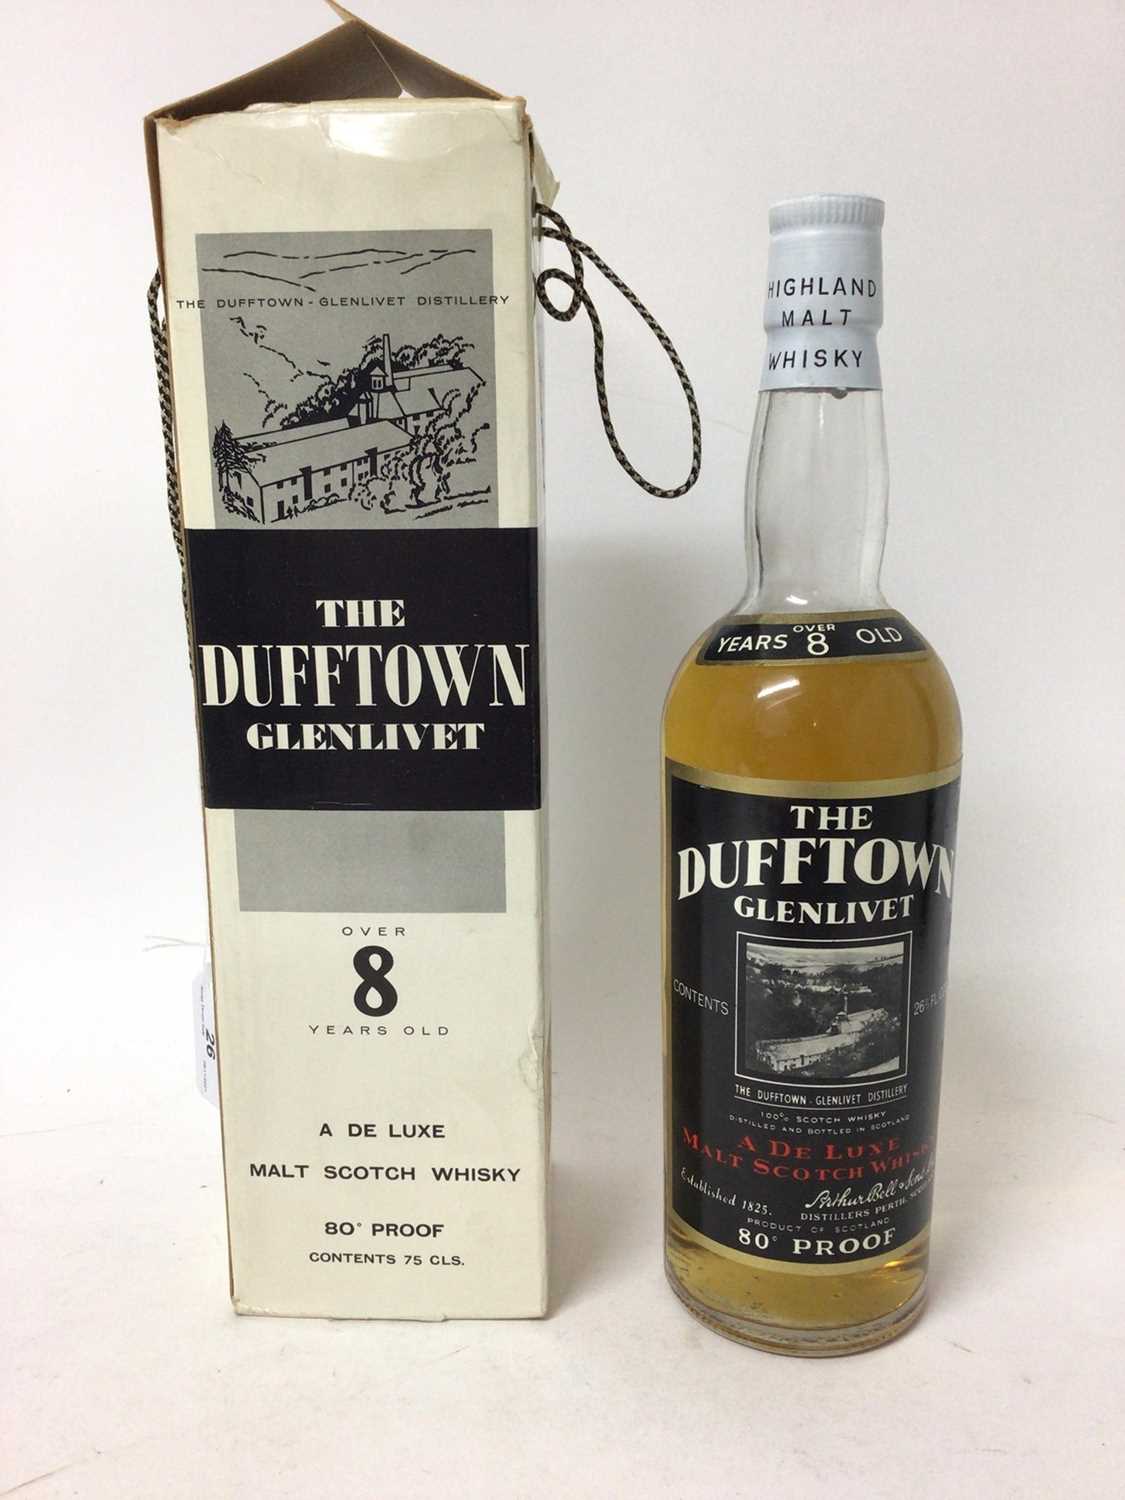 Lot 26 - Dufftown Glenlivet Over 8 years old De Luxe Scotch Whisky, 80 proof, 26 2/3 fl. ozs, in original case